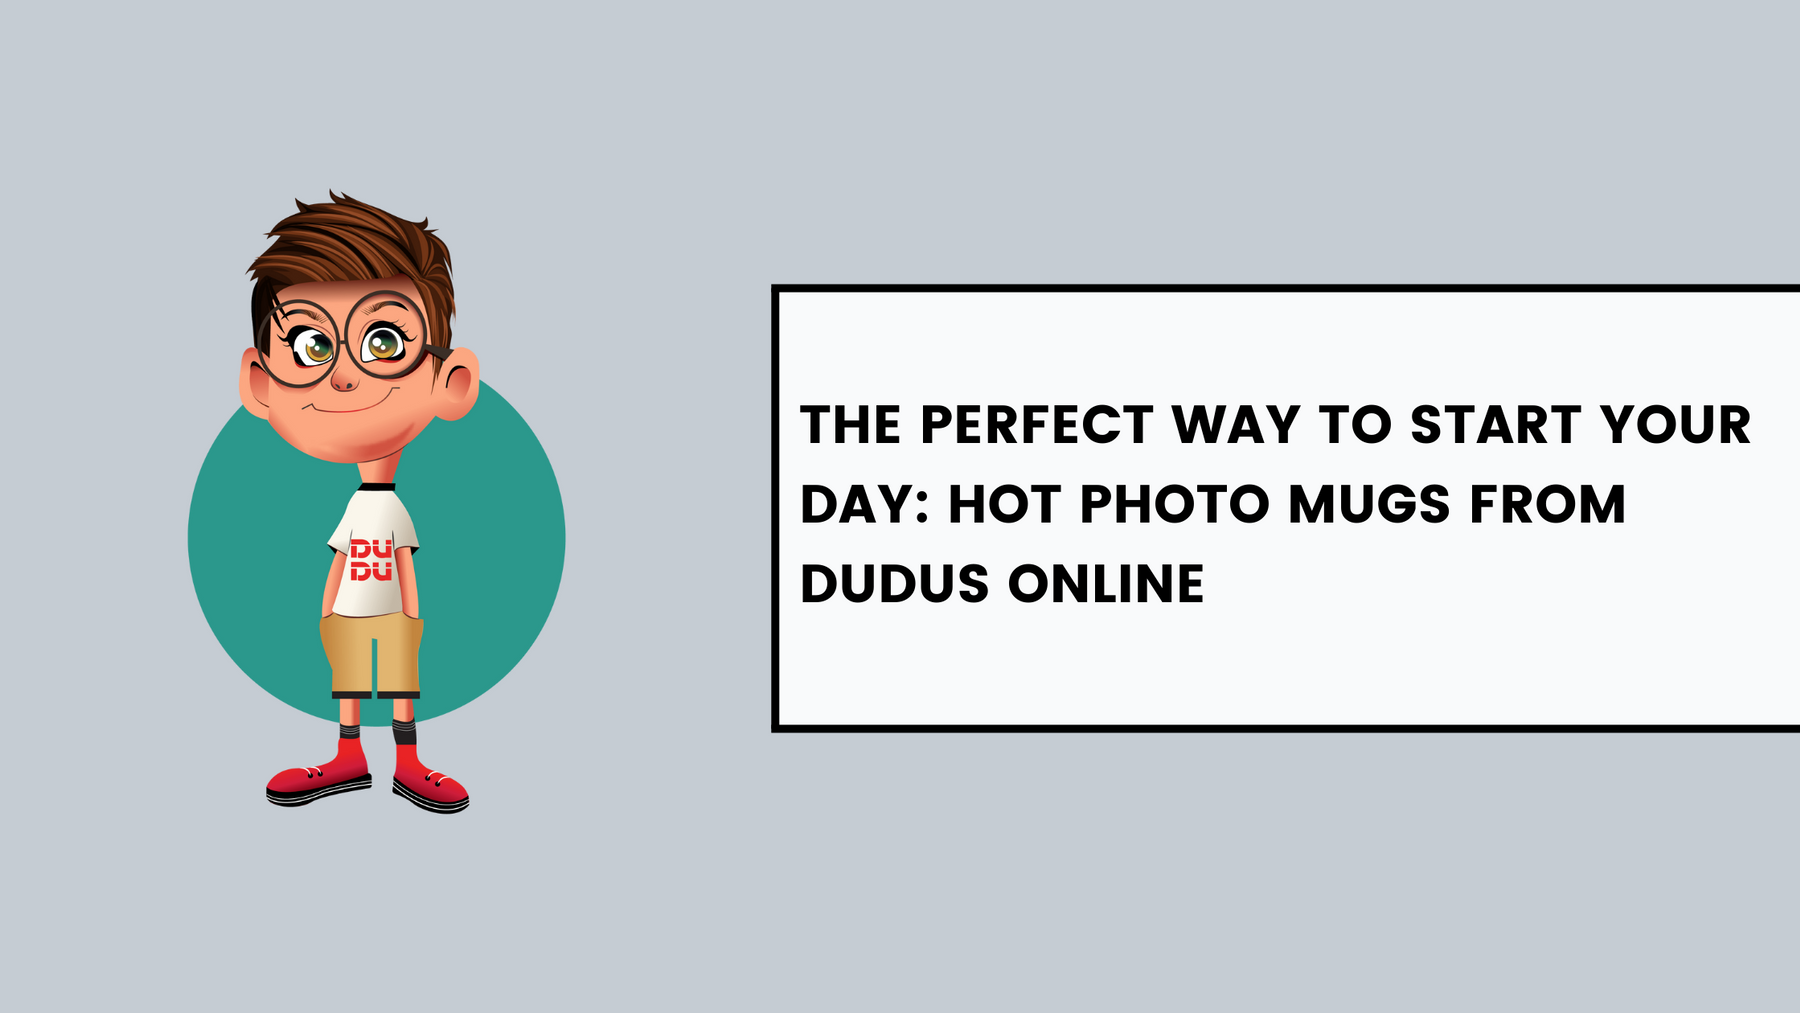 The Perfect Way to Start Your Day: Hot Photo Mugs from Dudus Online